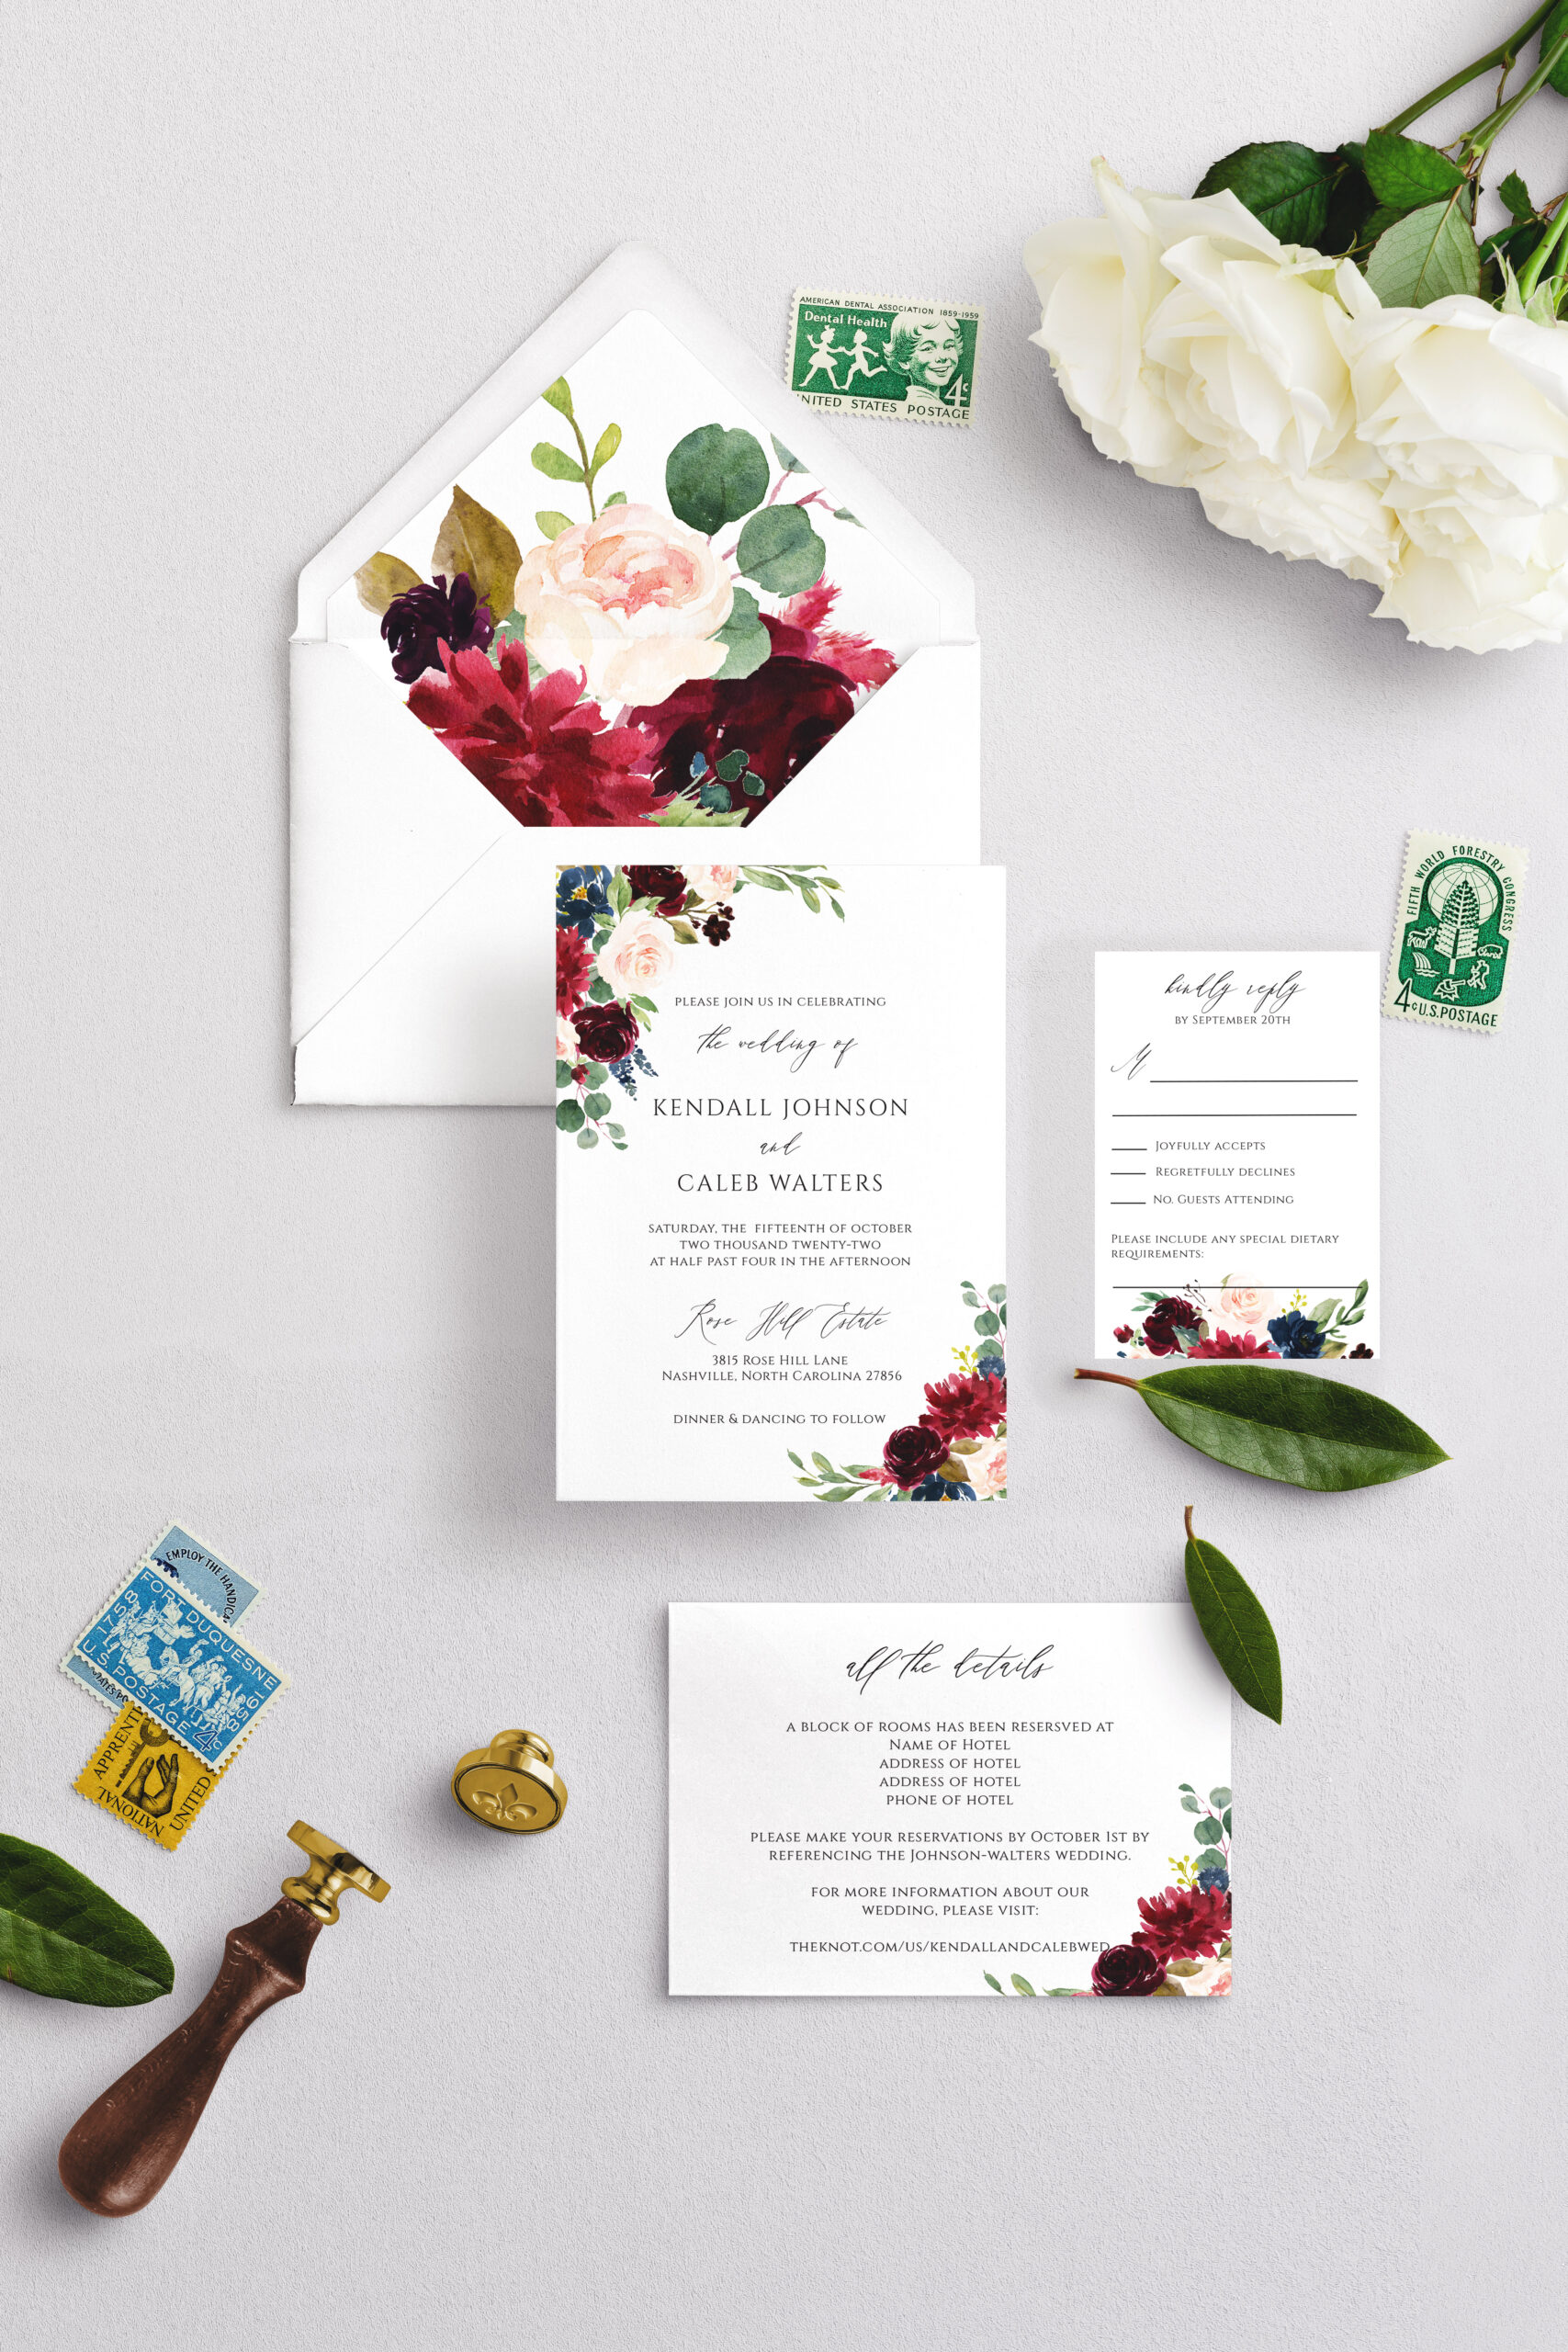 The Kendall Wedding Invitation Suite - burgundy, blush and navy floral corners